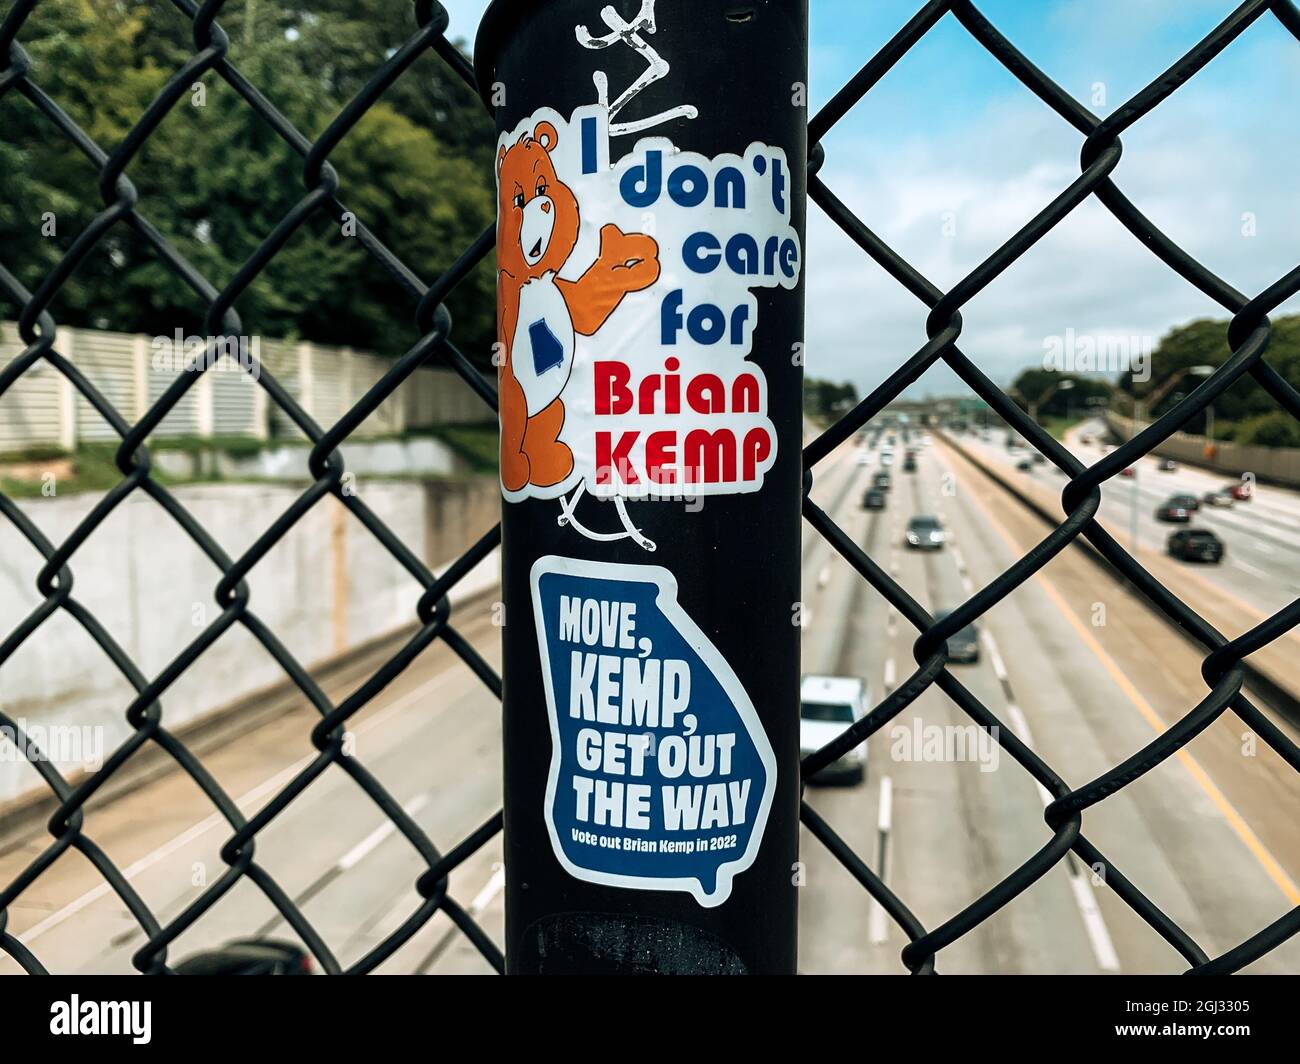 ATLANTA, UNITED STATES - Aug 18, 2021: Anti Brian Kemp stickers encouraging Georgia voters to vote him out in the next election for Governor Stock Photo